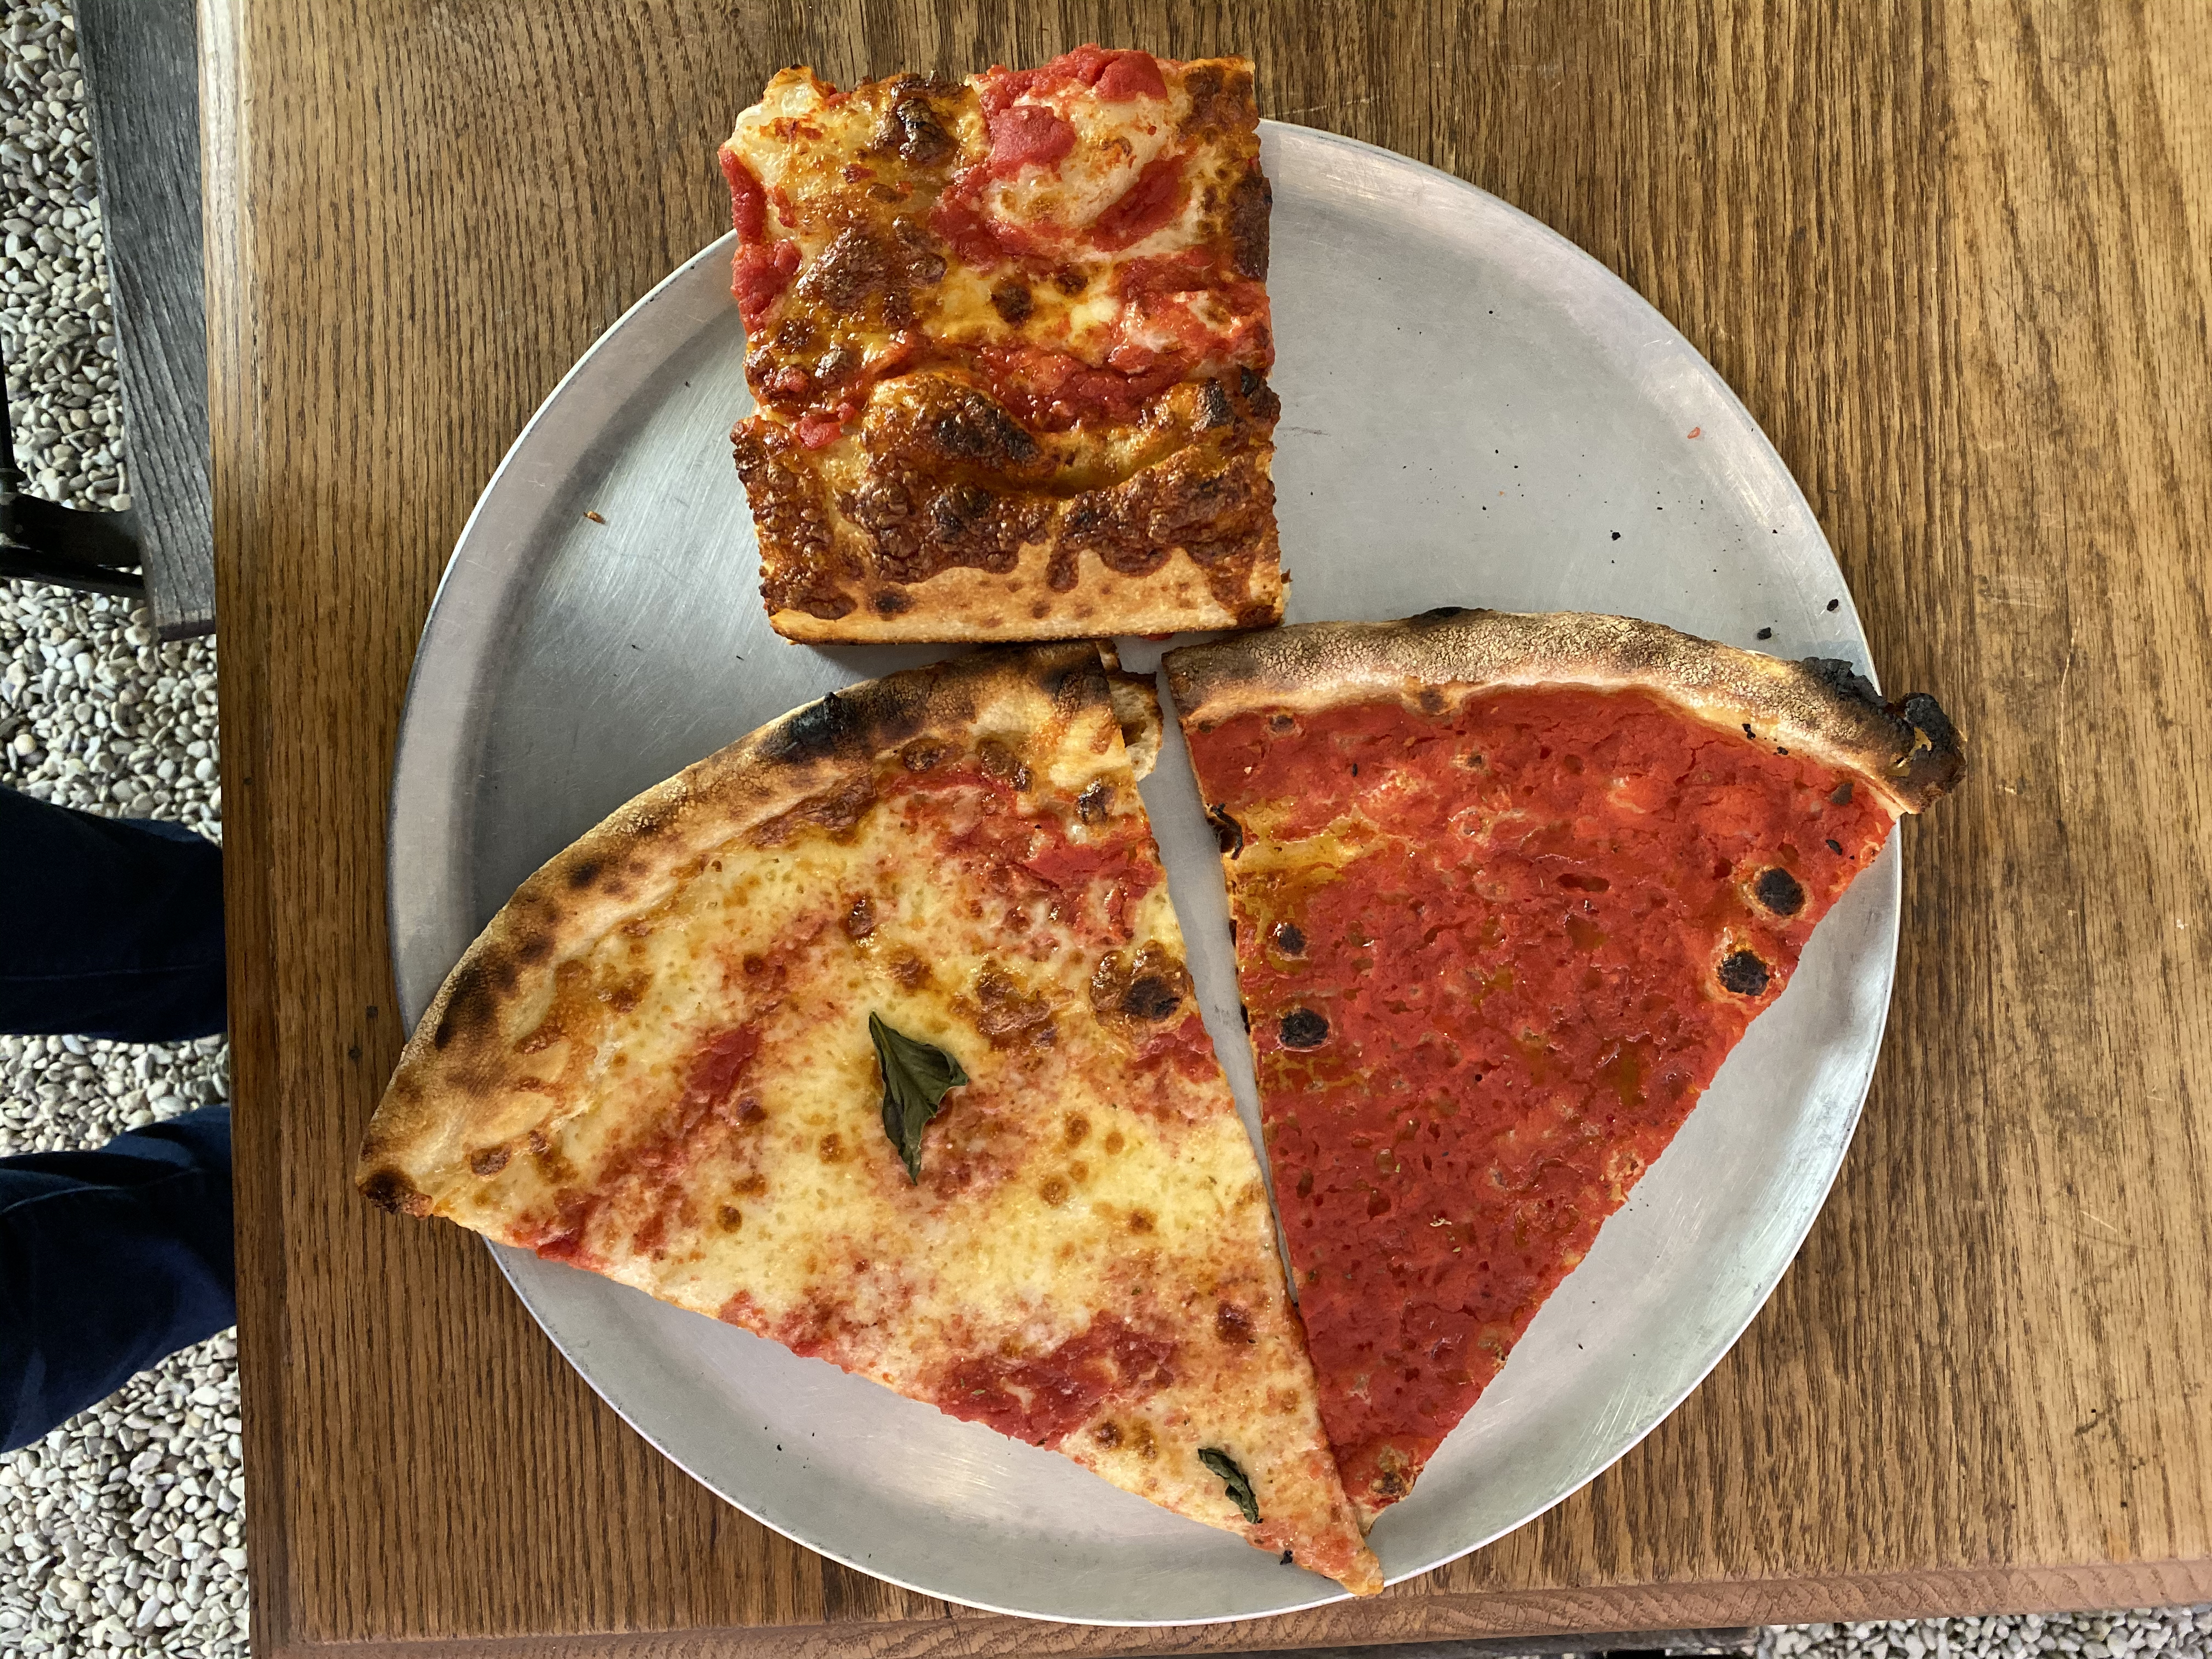 From top: The square Sicilian slice, followed by the triangular cheese and tomato slices at F&amp;F Pizzeria; the slices sit on a metal tray